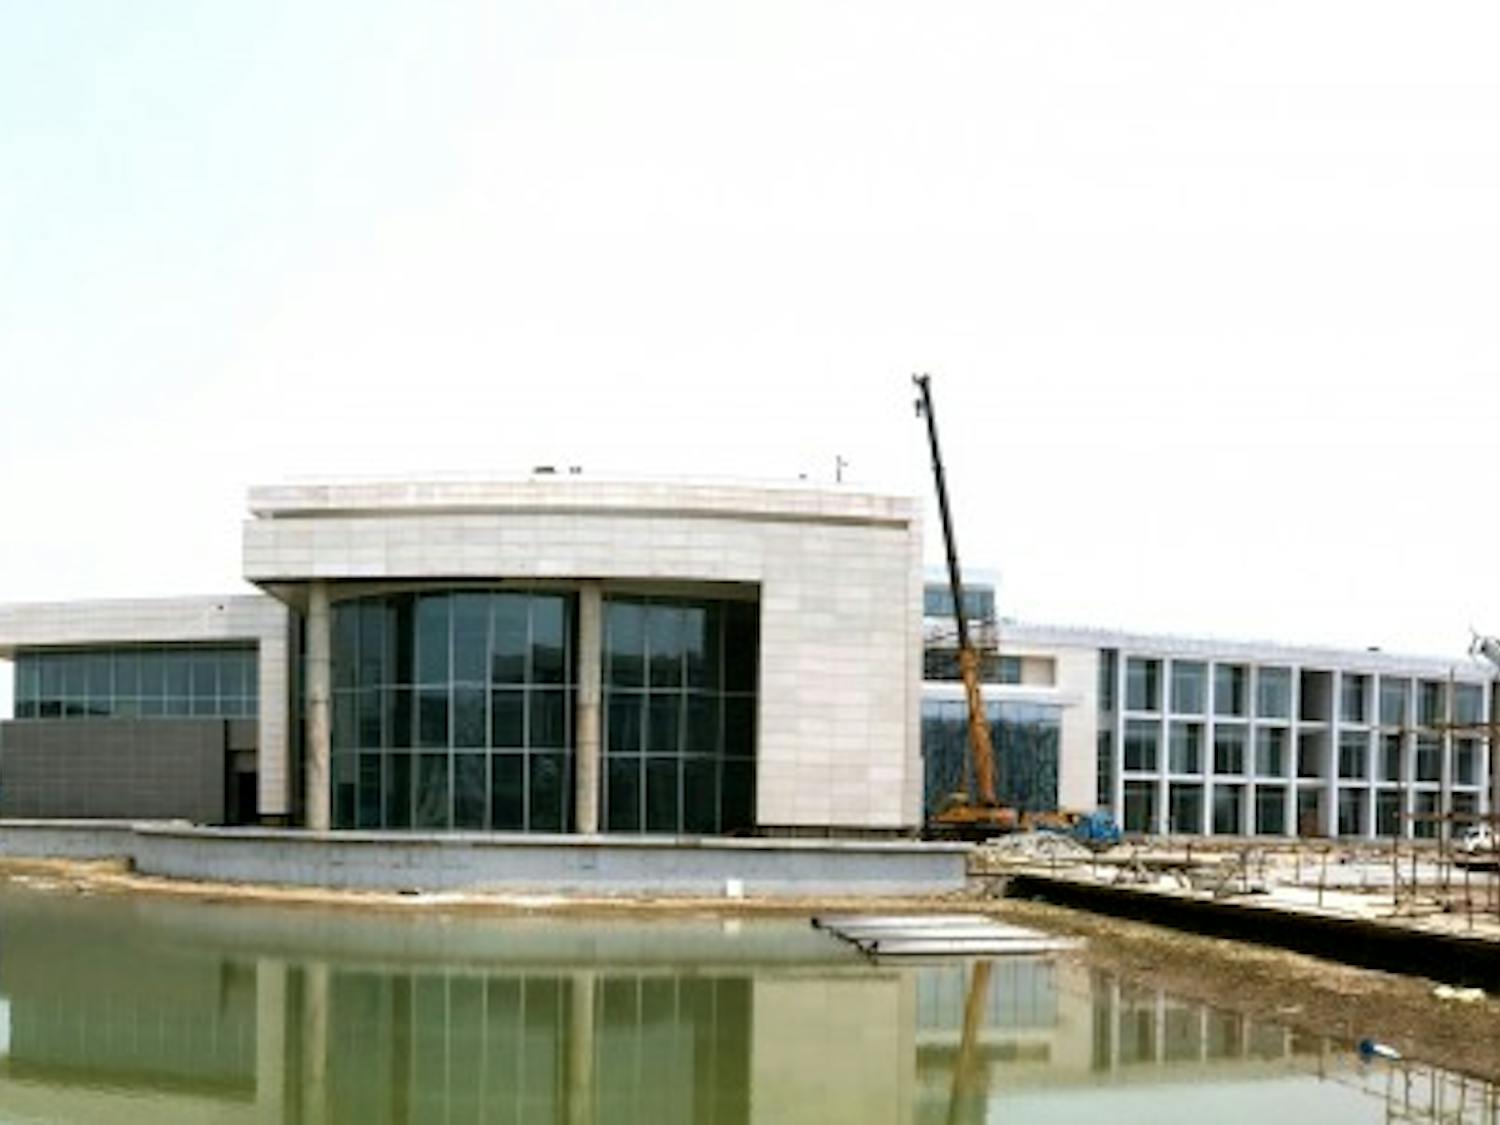 A panoramic view of the back of DKU's academic building and its signature water pavilions.